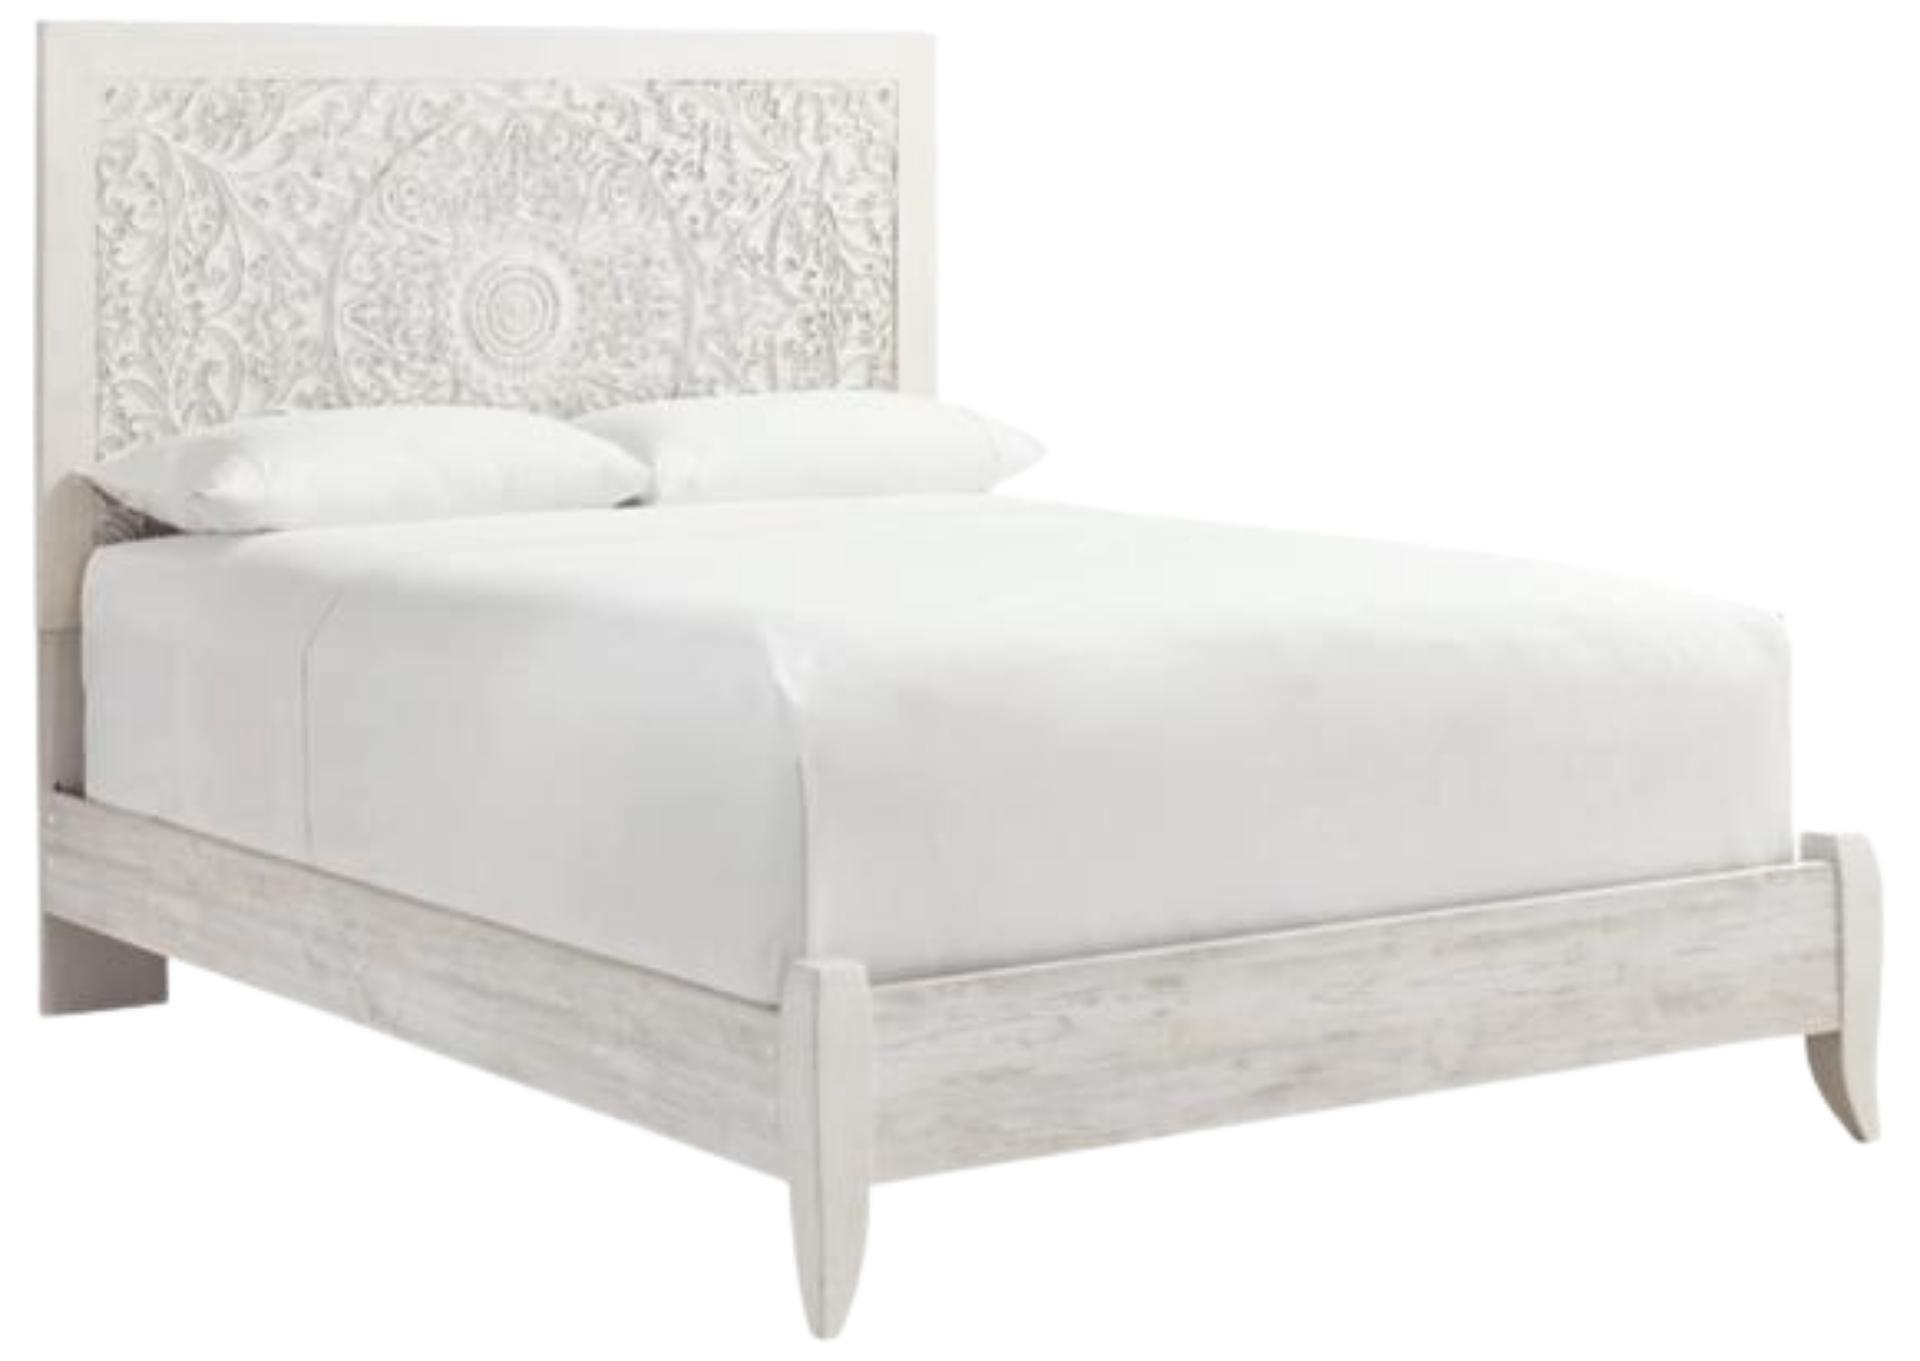 PAXBERRY QUEEN PANEL BED,ASHLEY FURNITURE INC.